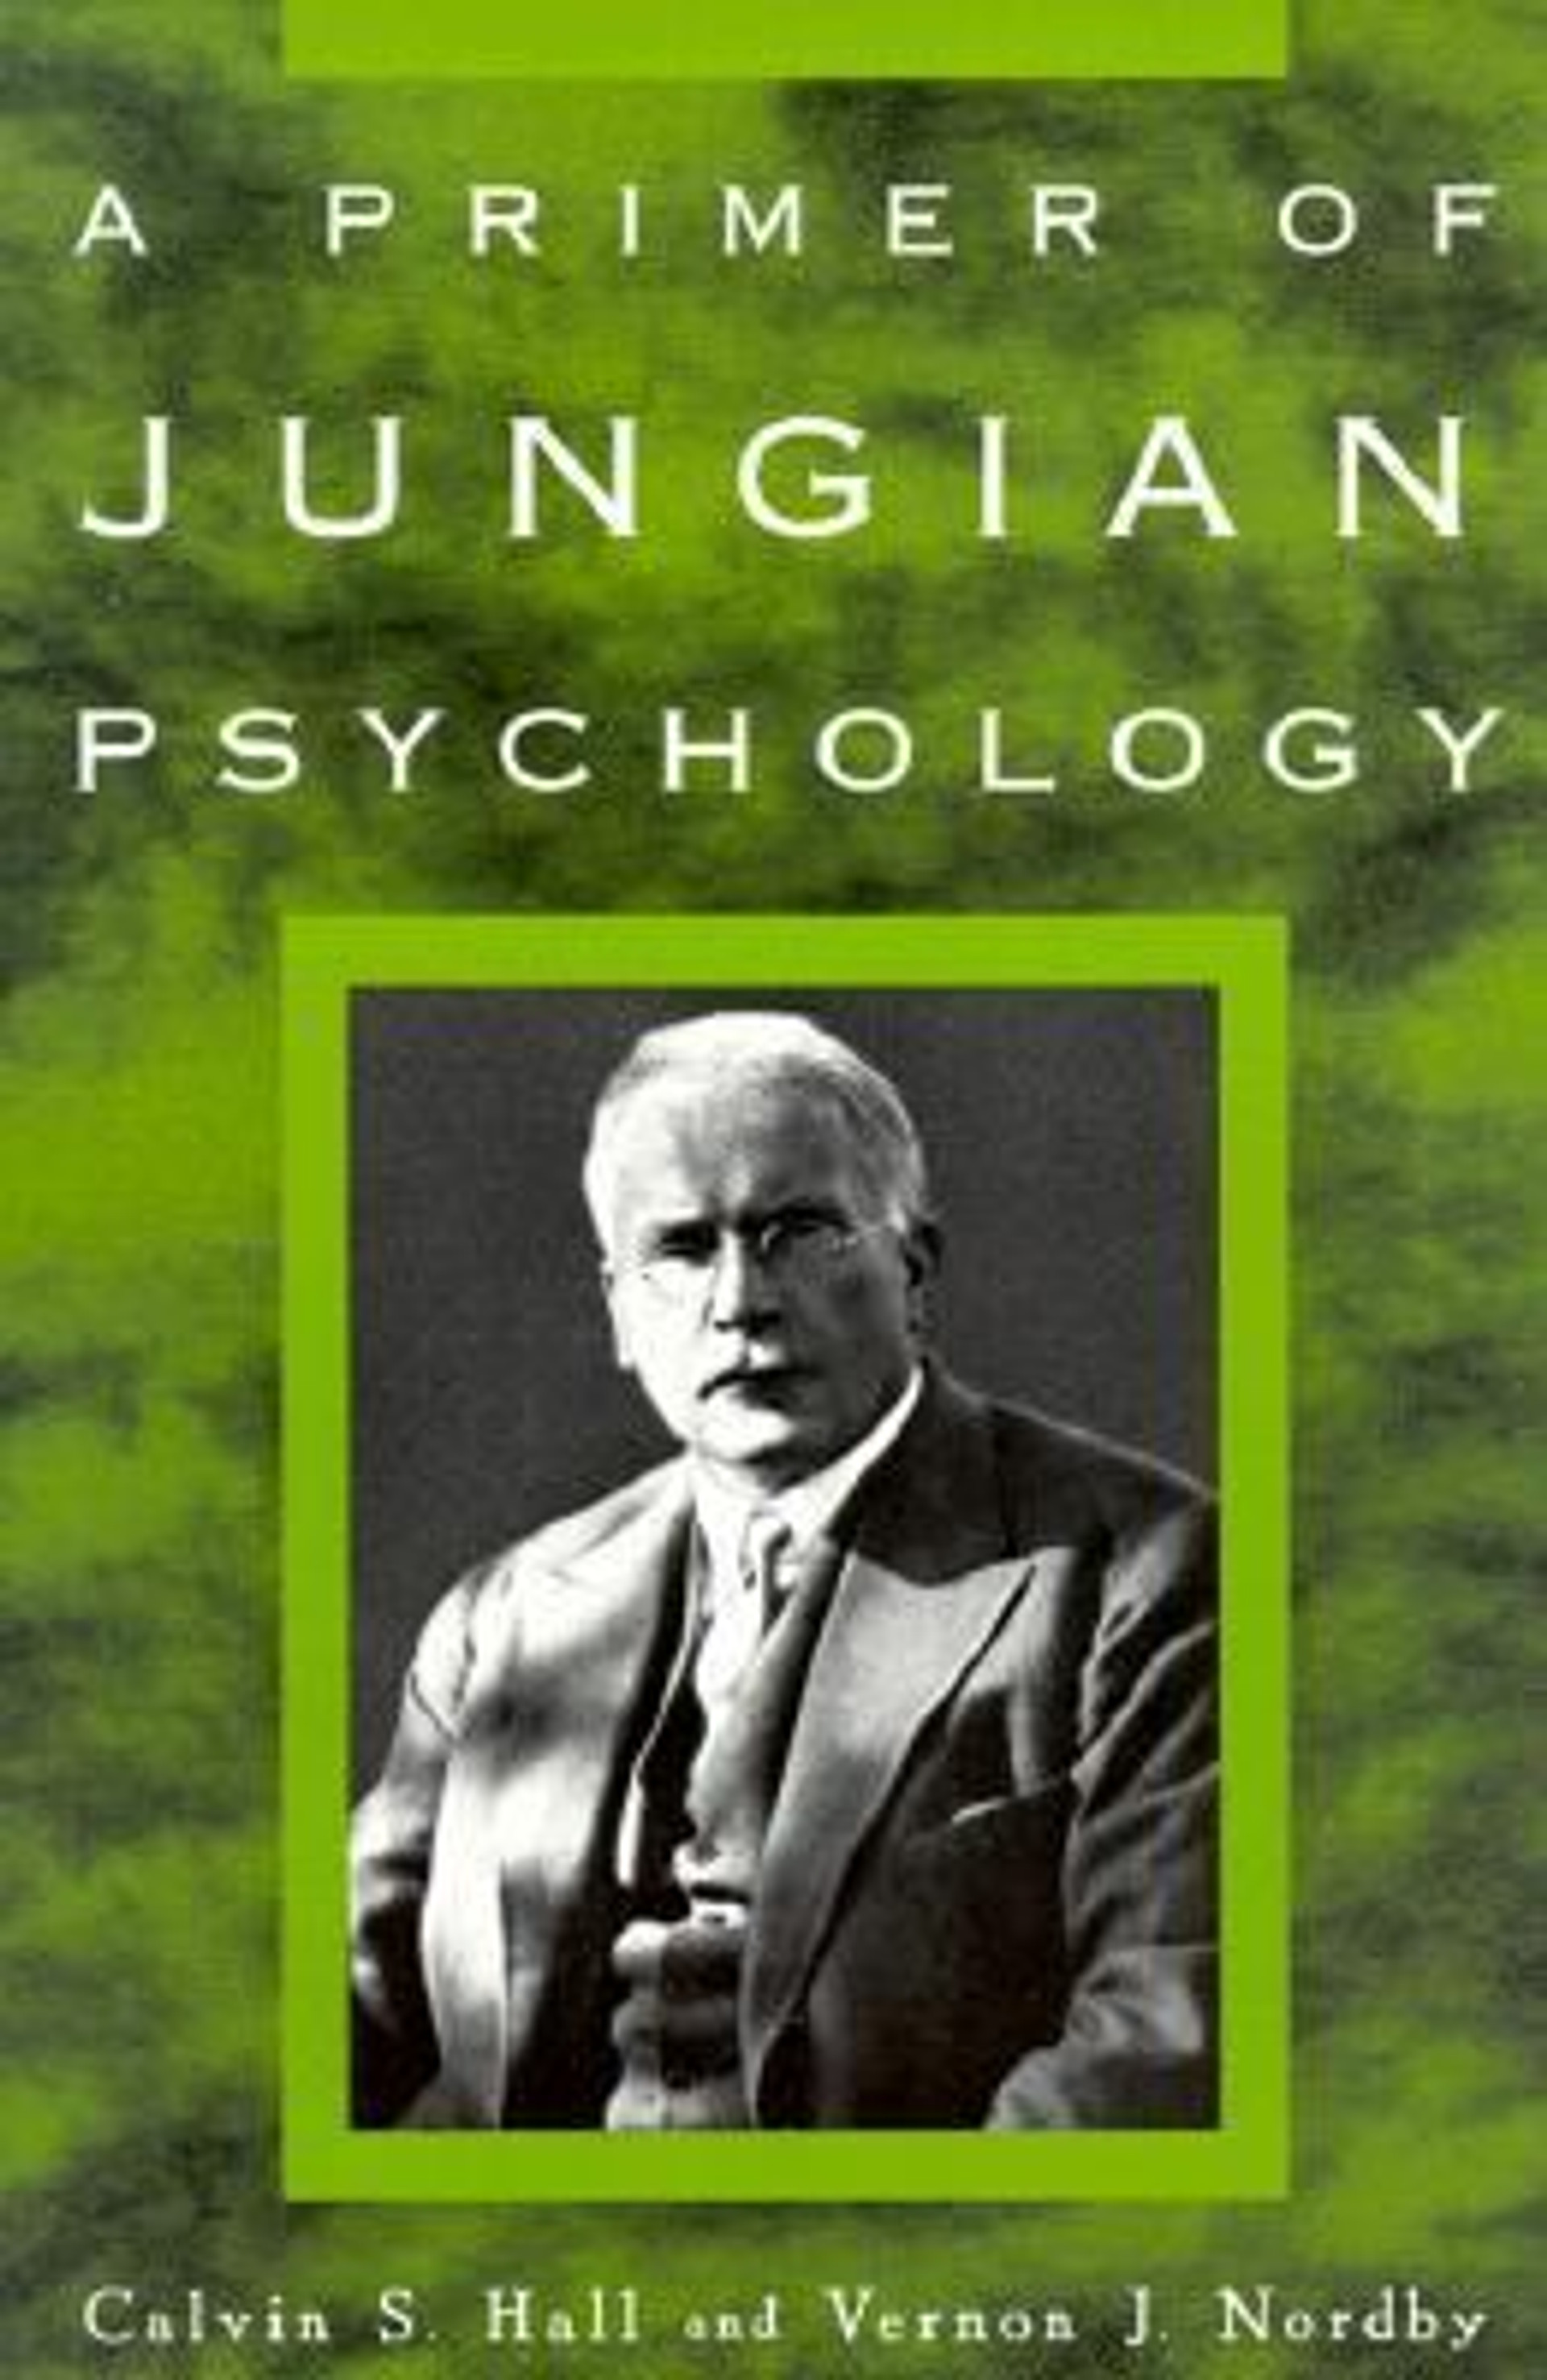 online phd in jungian psychology